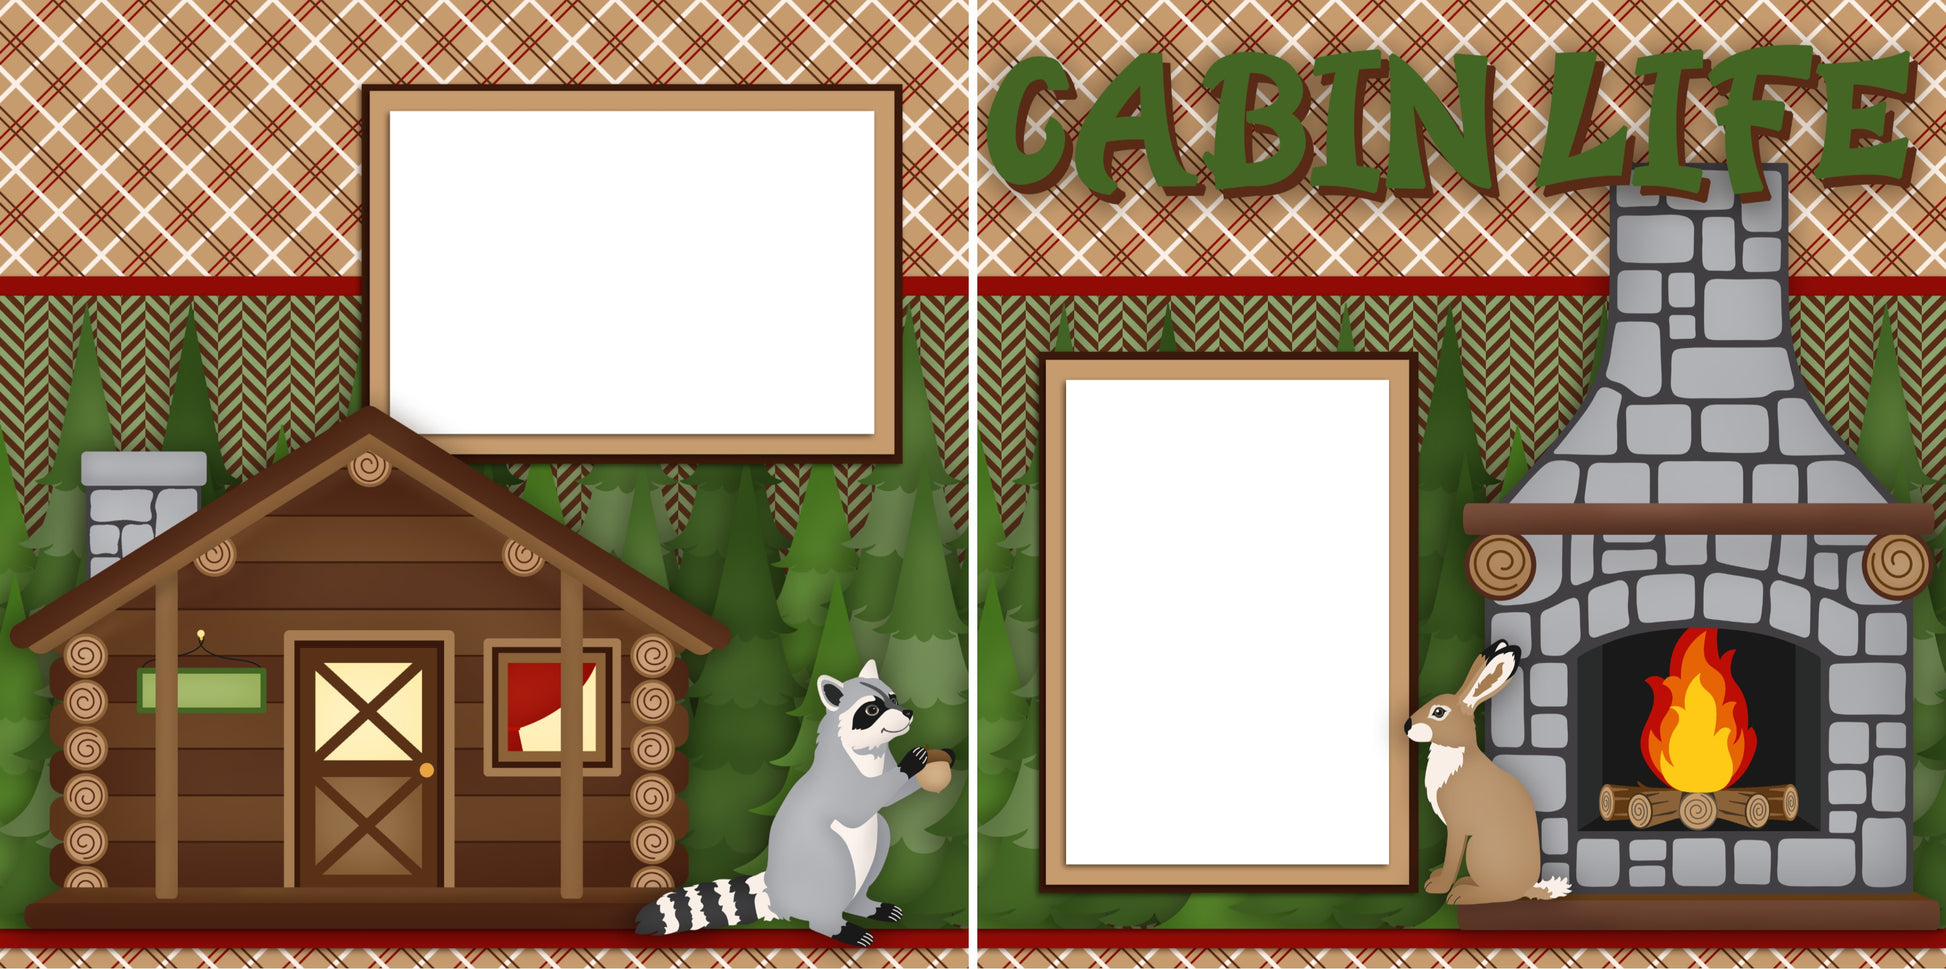 Cabin Life - Digital Scrapbook Pages - INSTANT DOWNLOAD - EZscrapbooks Scrapbook Layouts Camping - Hiking, Hunting - Fishing